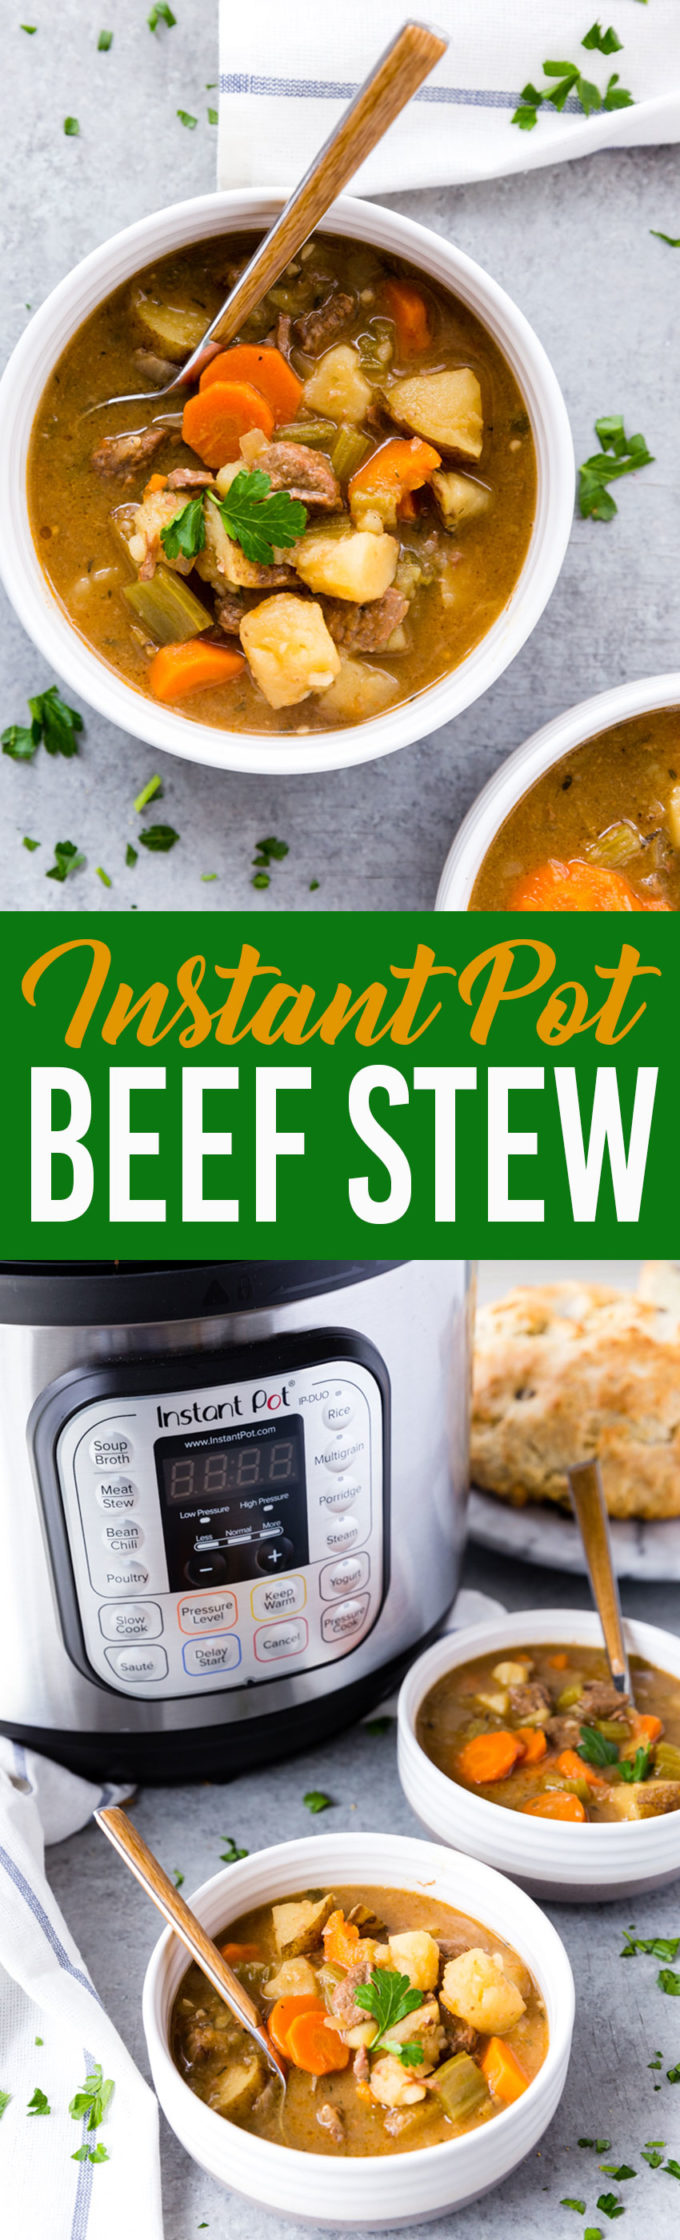 Instant Pot or Slow Cooker Beef Stew, instructions included for both. Abundant, thick and tender meat.